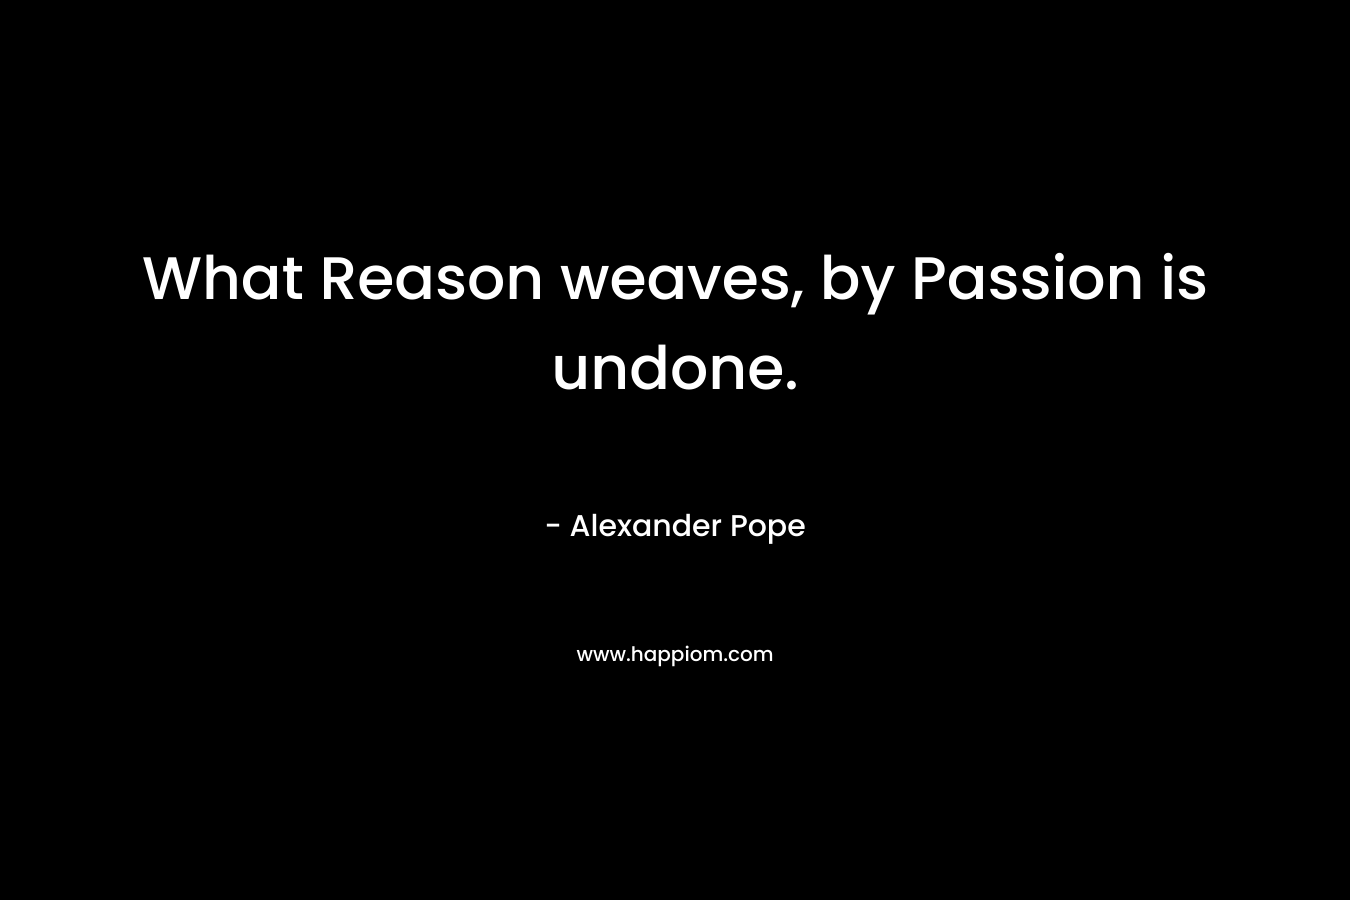 What Reason weaves, by Passion is undone.